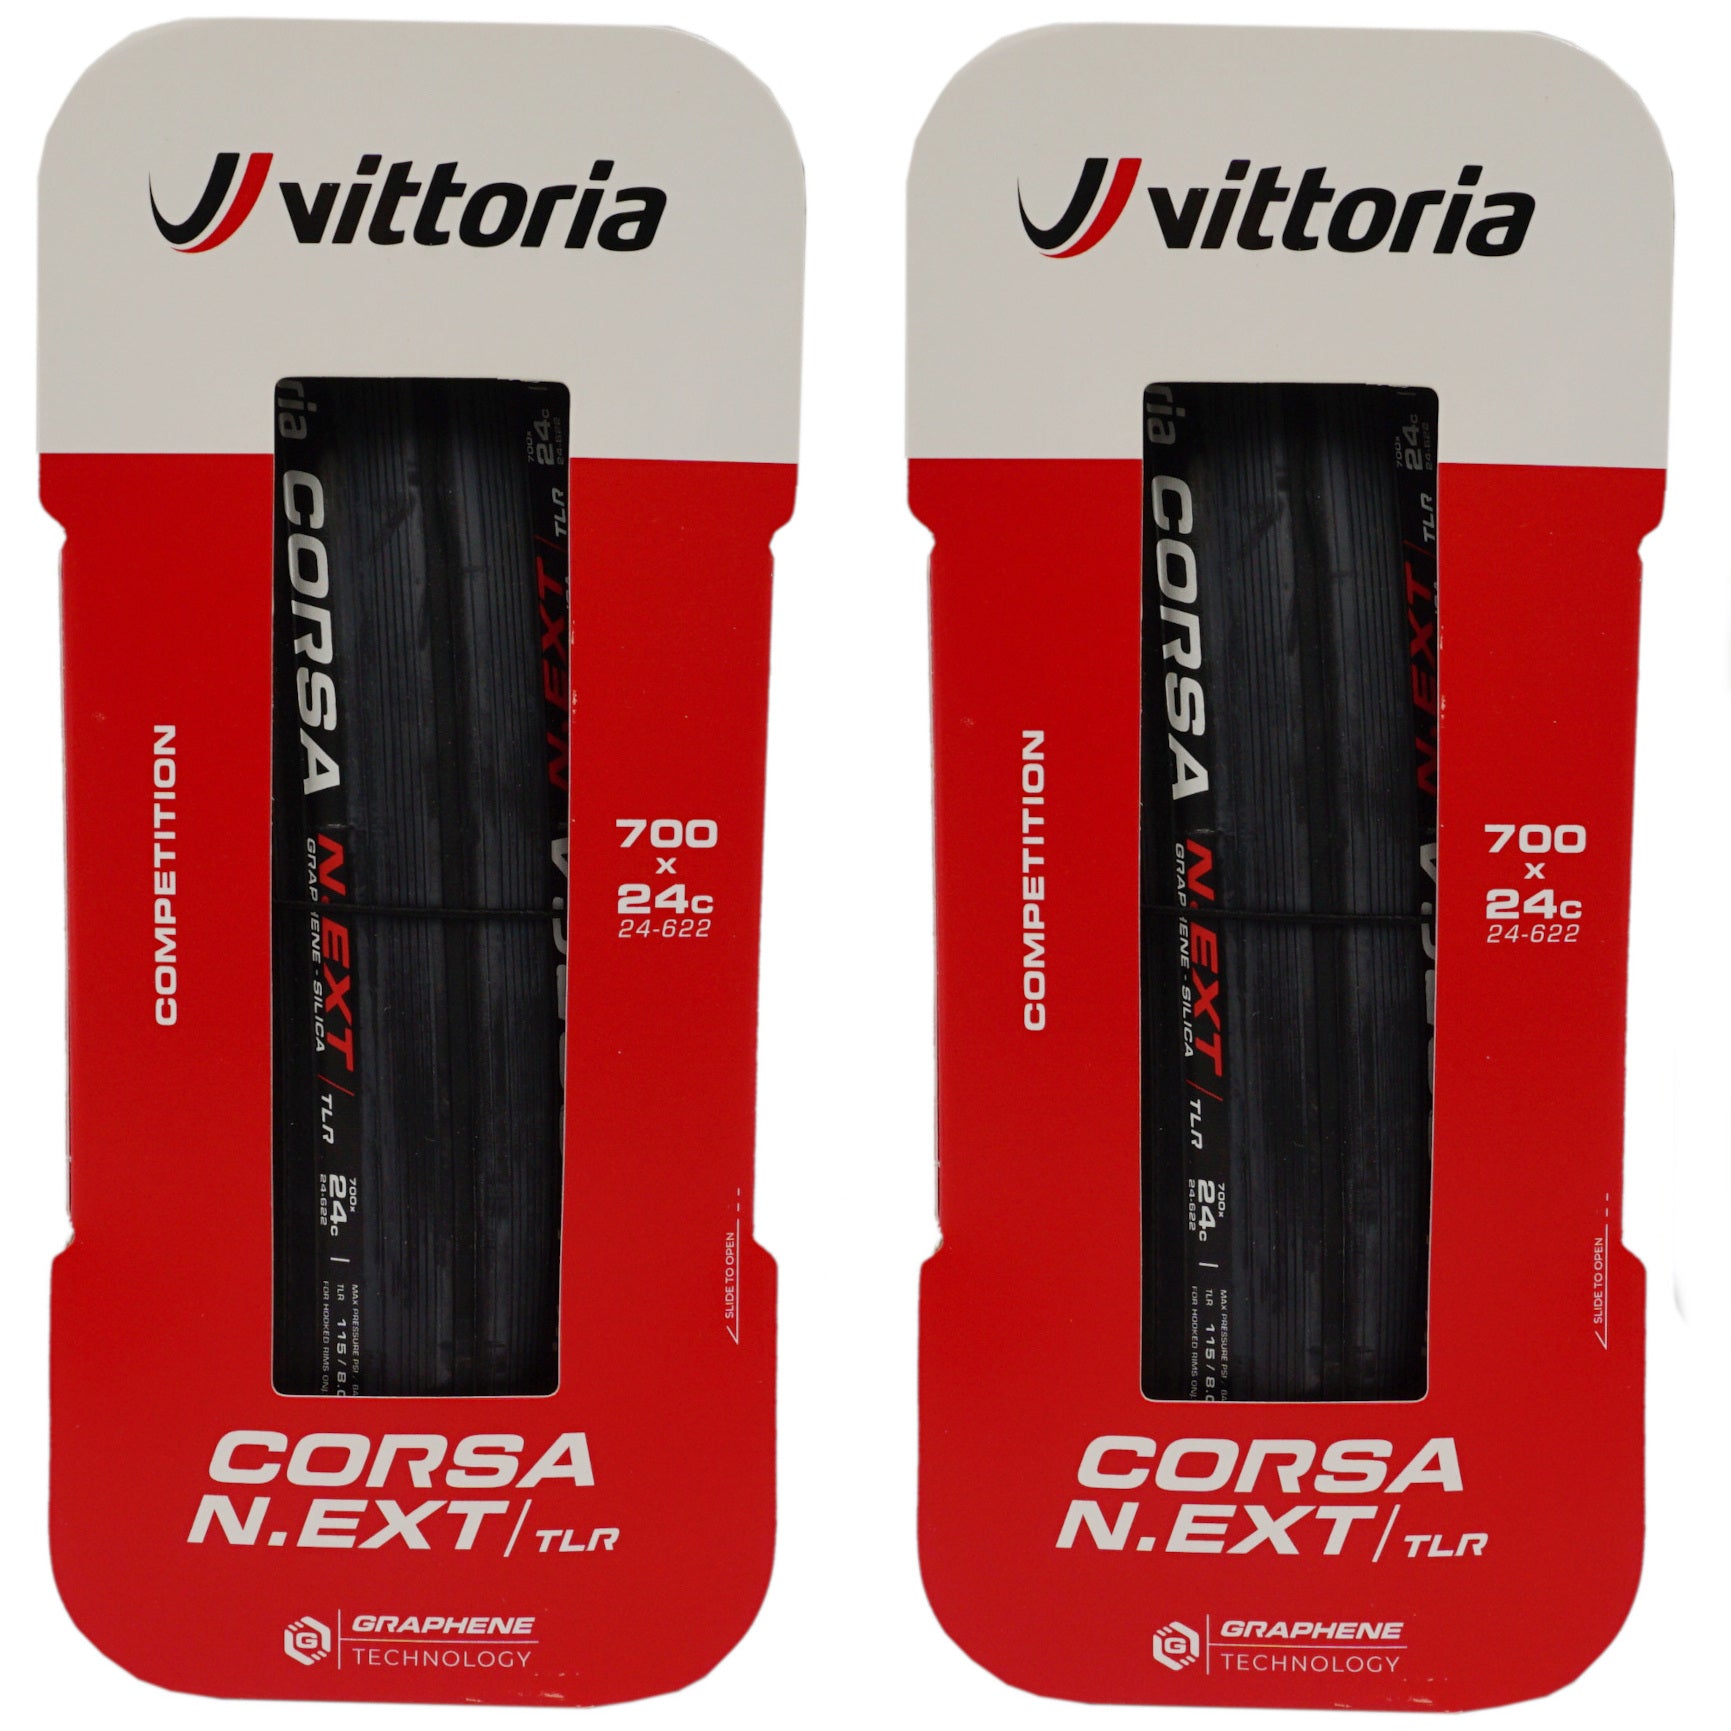 Vittoria Corsa N.EXT TLR 700c Tubeless Road Tire